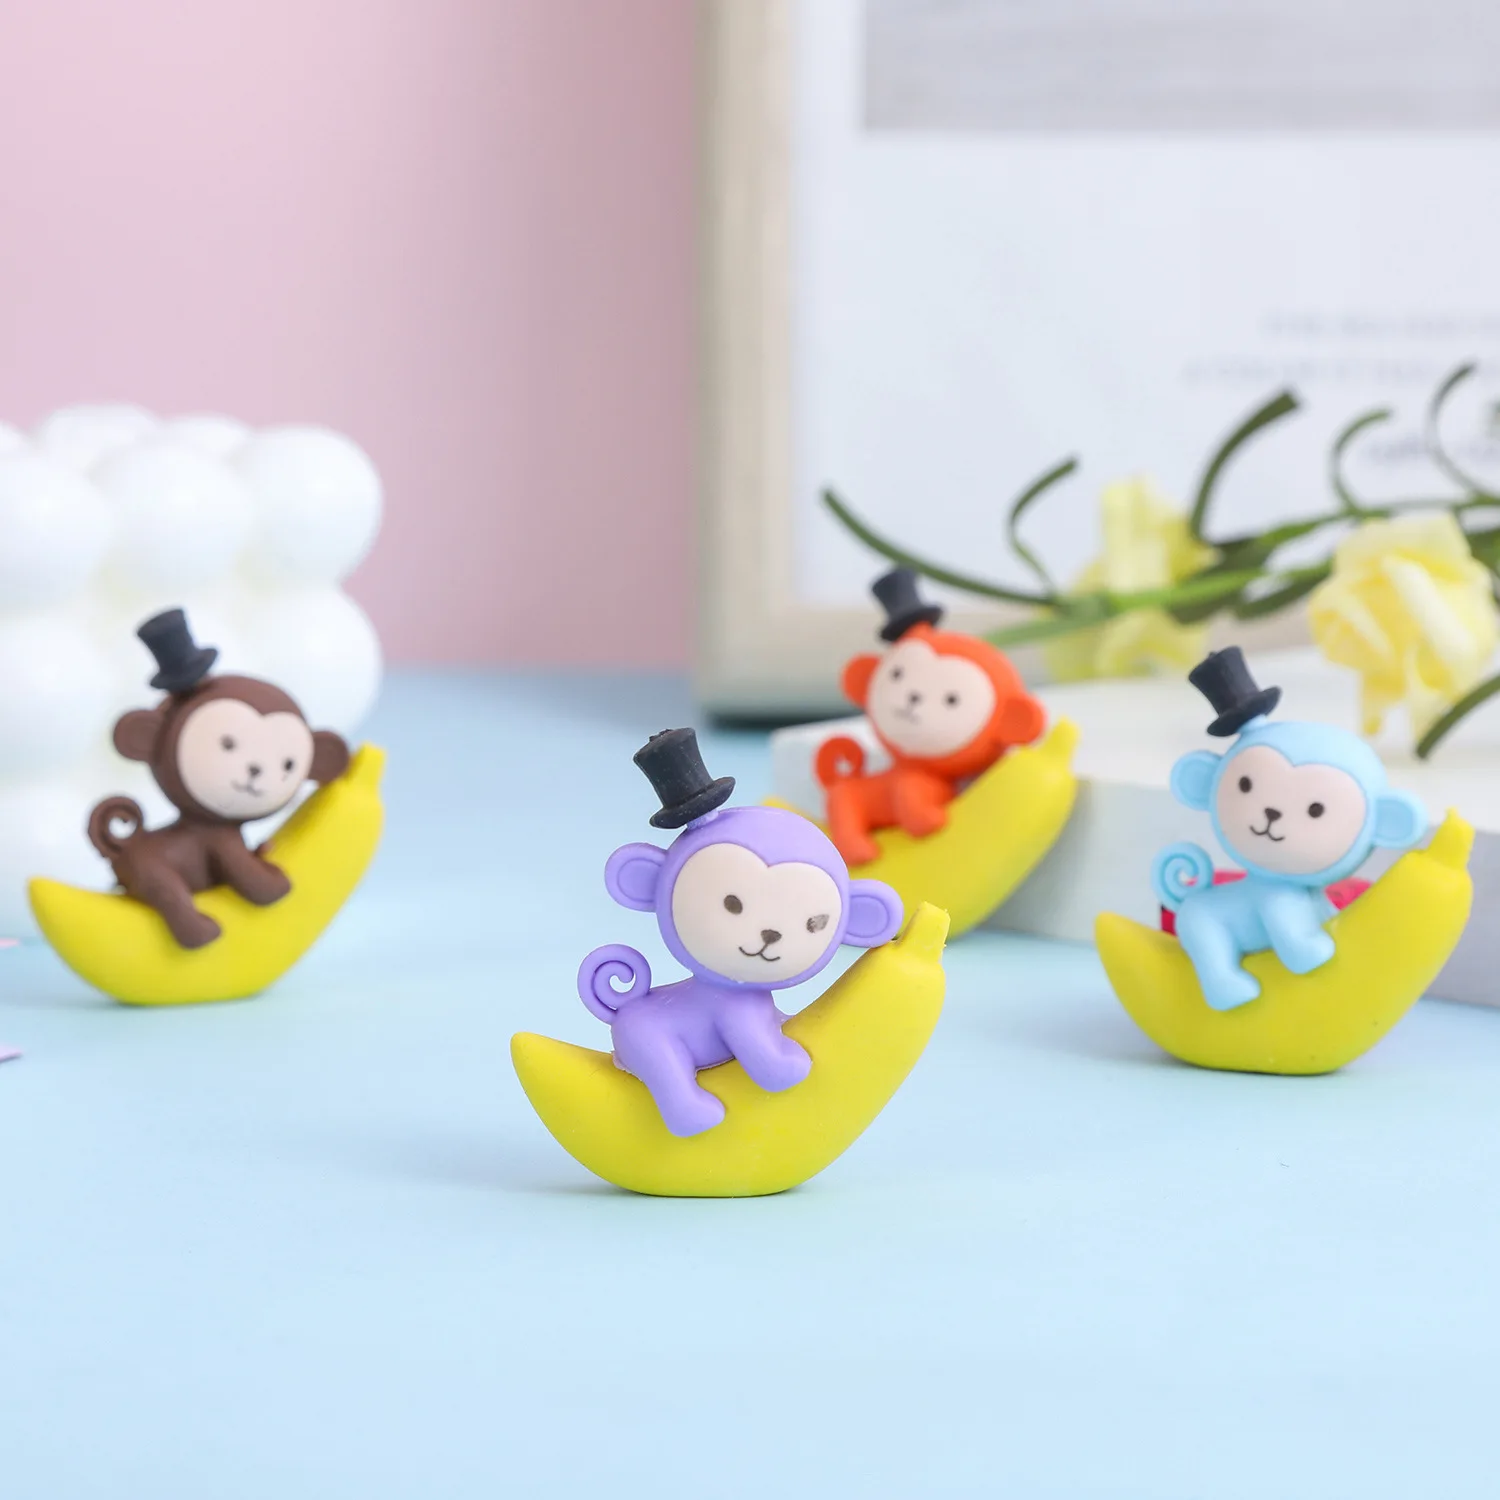 

30 Pc Cute Cartoon Monkey Banana Animal Pencil Rubber Eraser/ Learning Stationery/ Children Student School Prize Christmas Gift